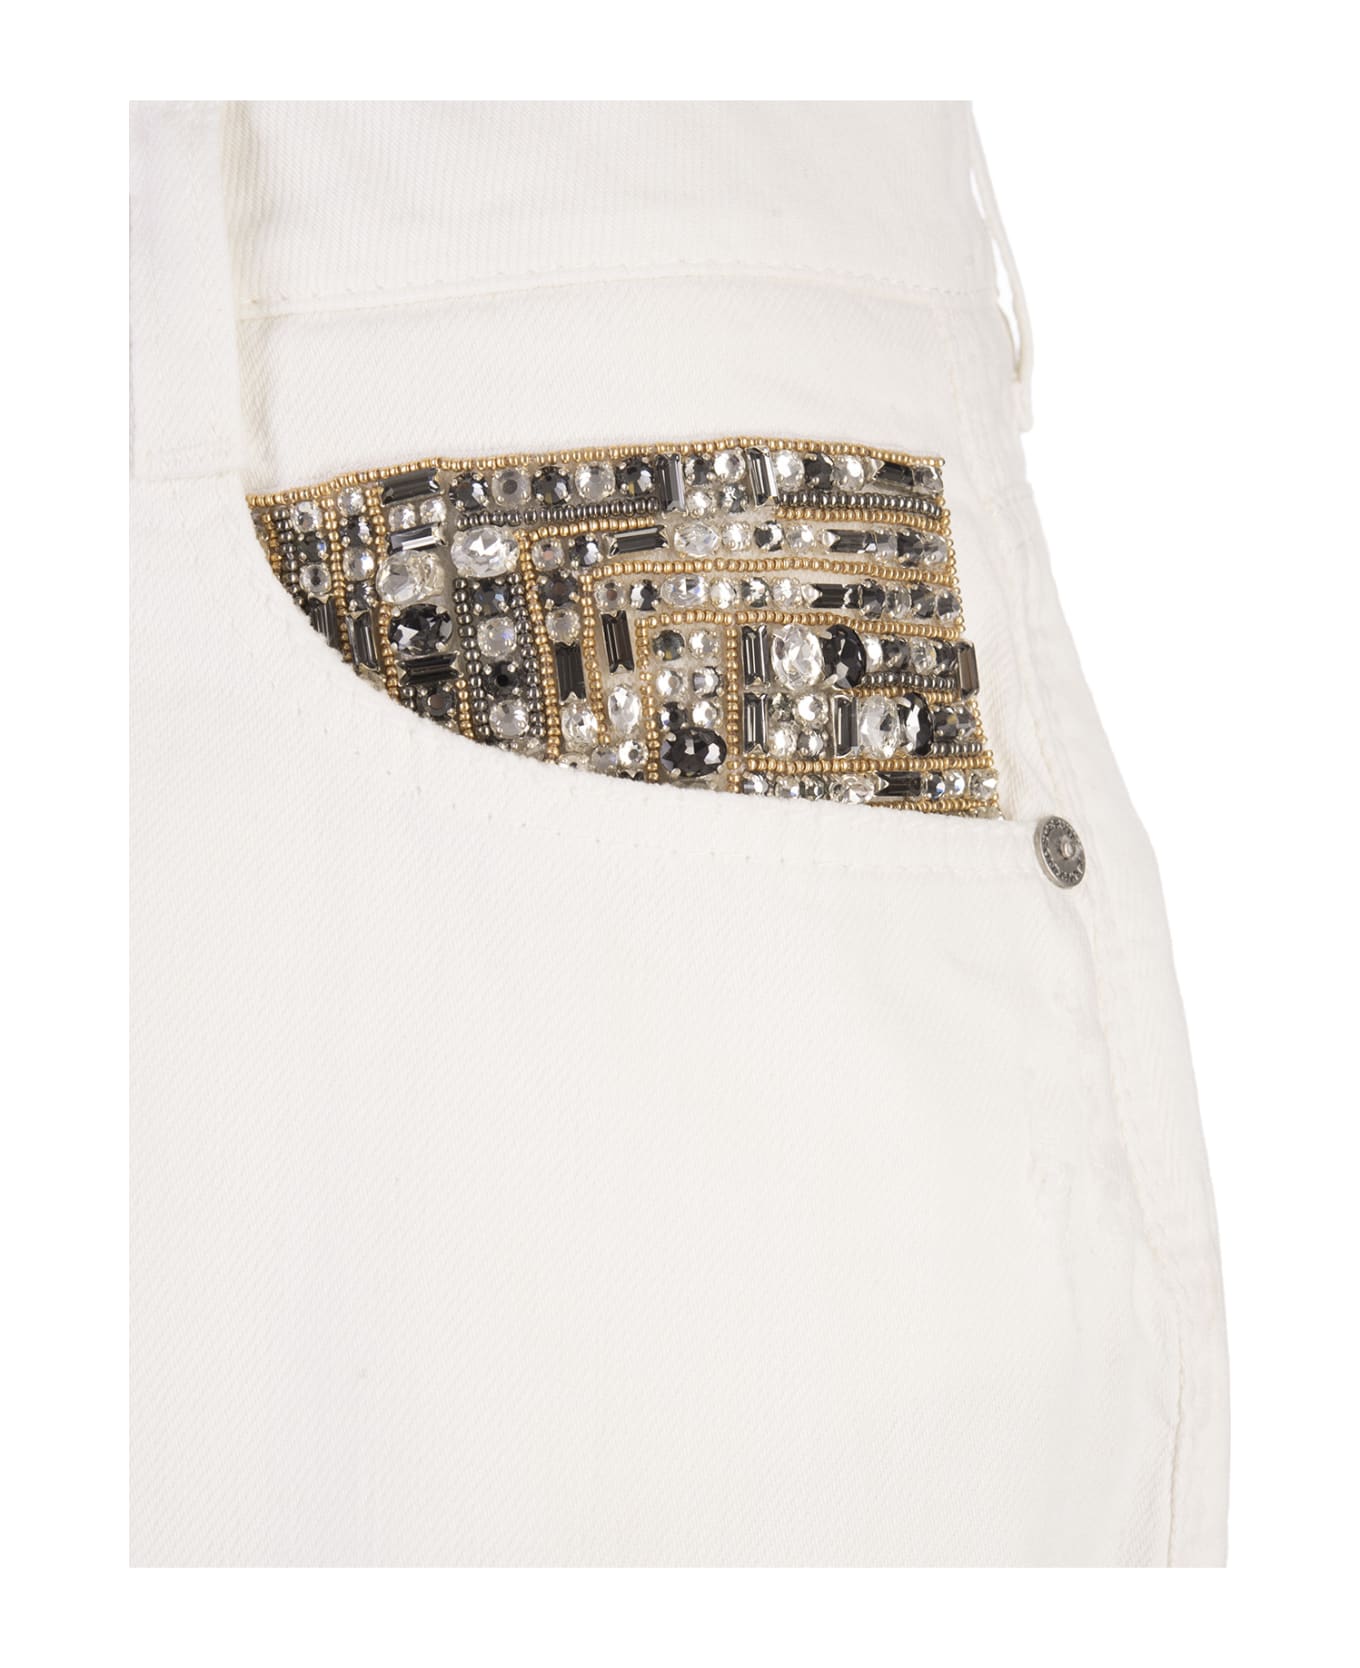 Ermanno Scervino White Shorts With Jewel Detailing - White